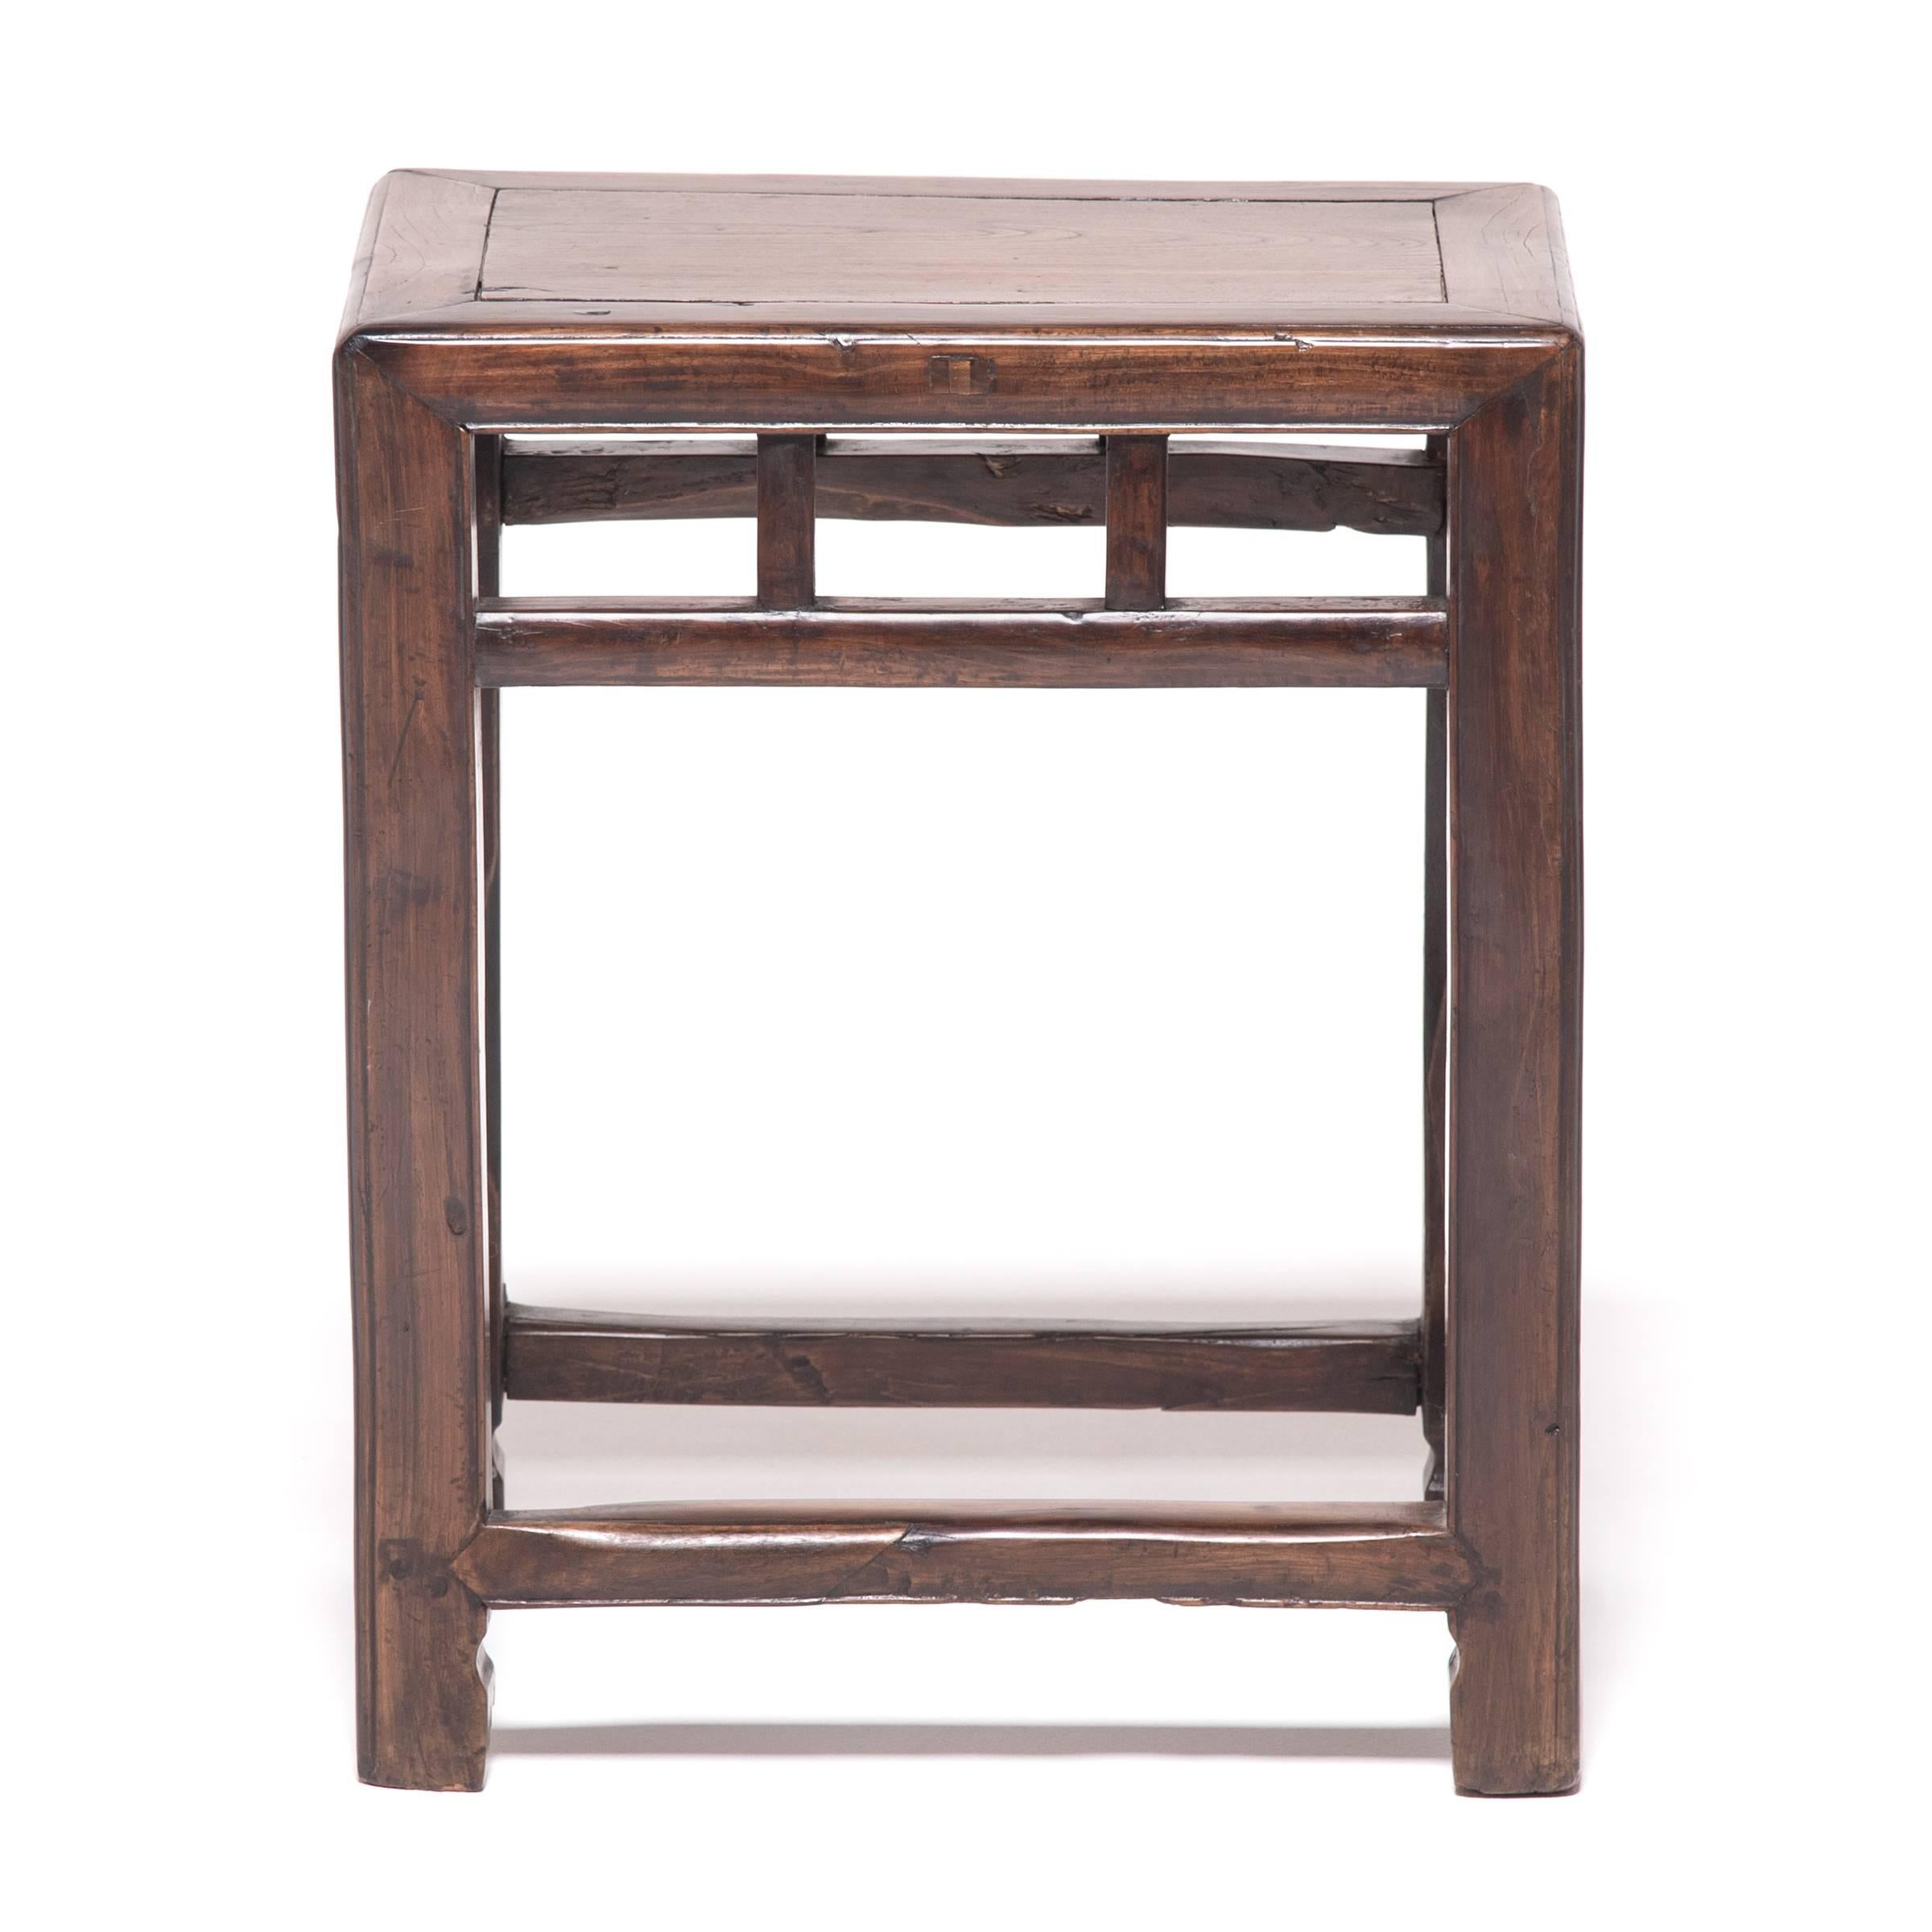 Pushed together, this pair of rectangular stools forms a square, hence the name “half stools.” Crafted of jia zhen and beech wood and finished with many coats of hand-applied lacquer, these stools are elegantly appointed with hoof feet and refined